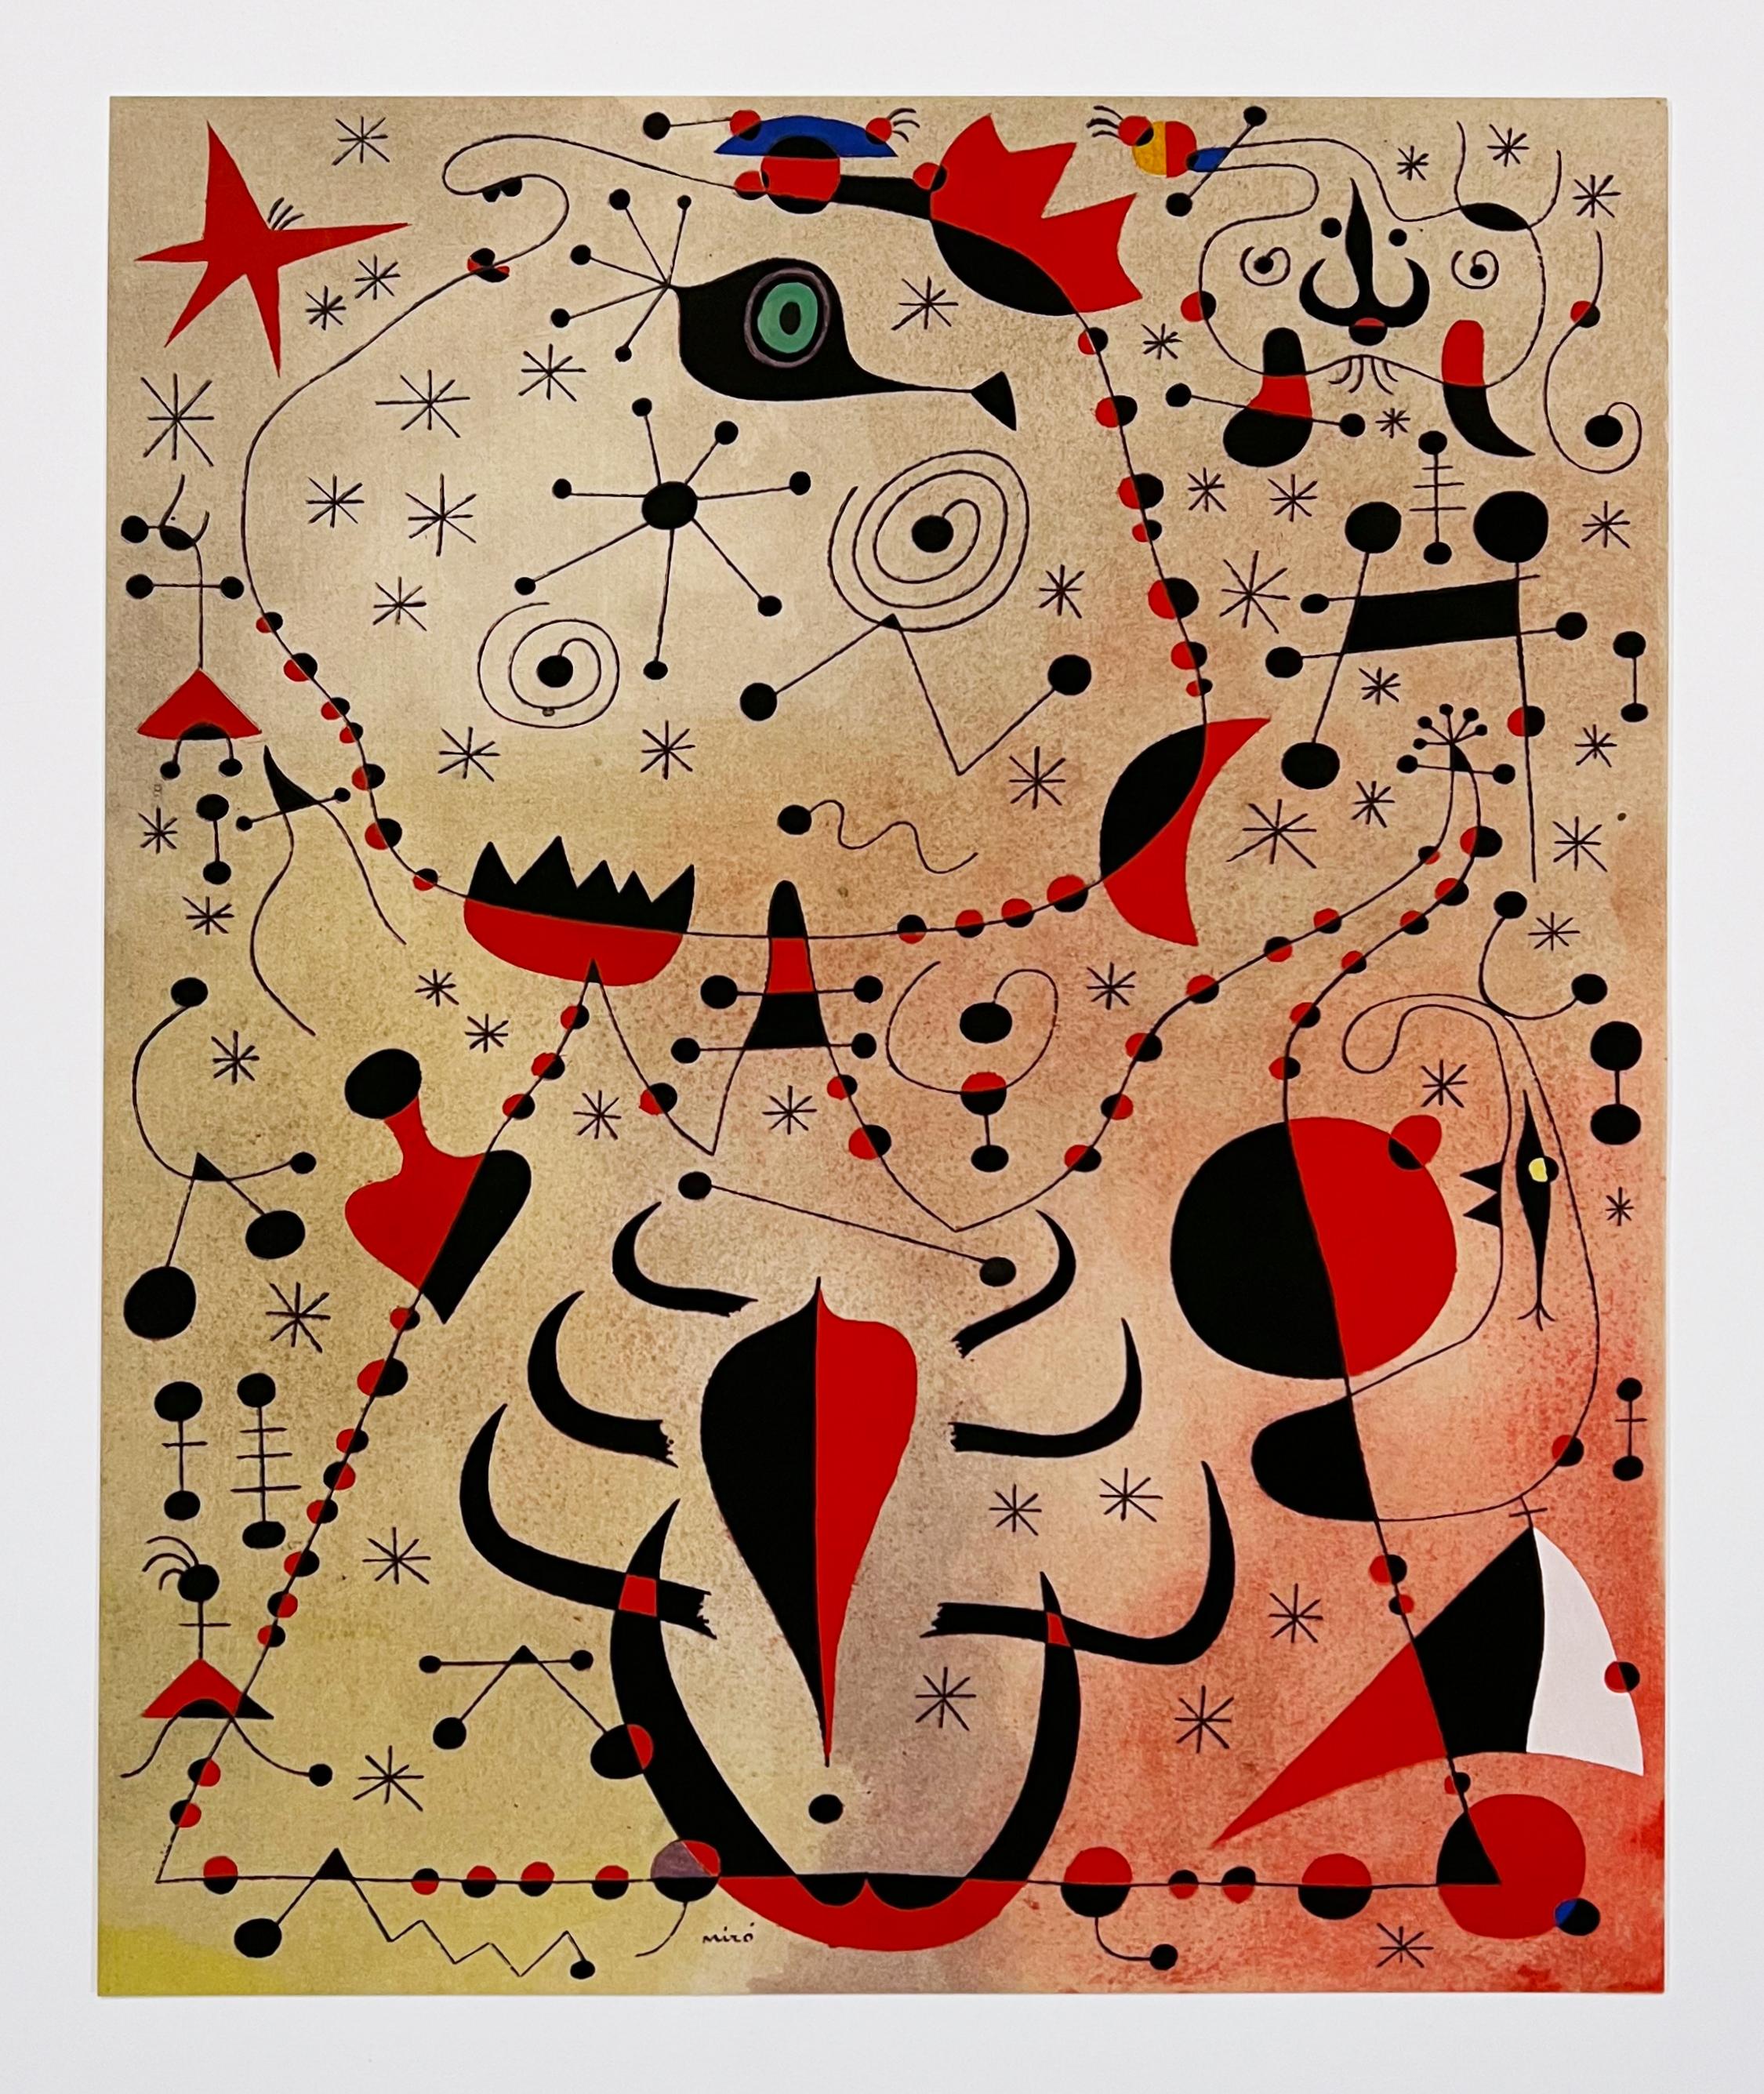 Joan Miro (after) Plate XXI from 1959 Constellations - Print by (after) Joan Miró